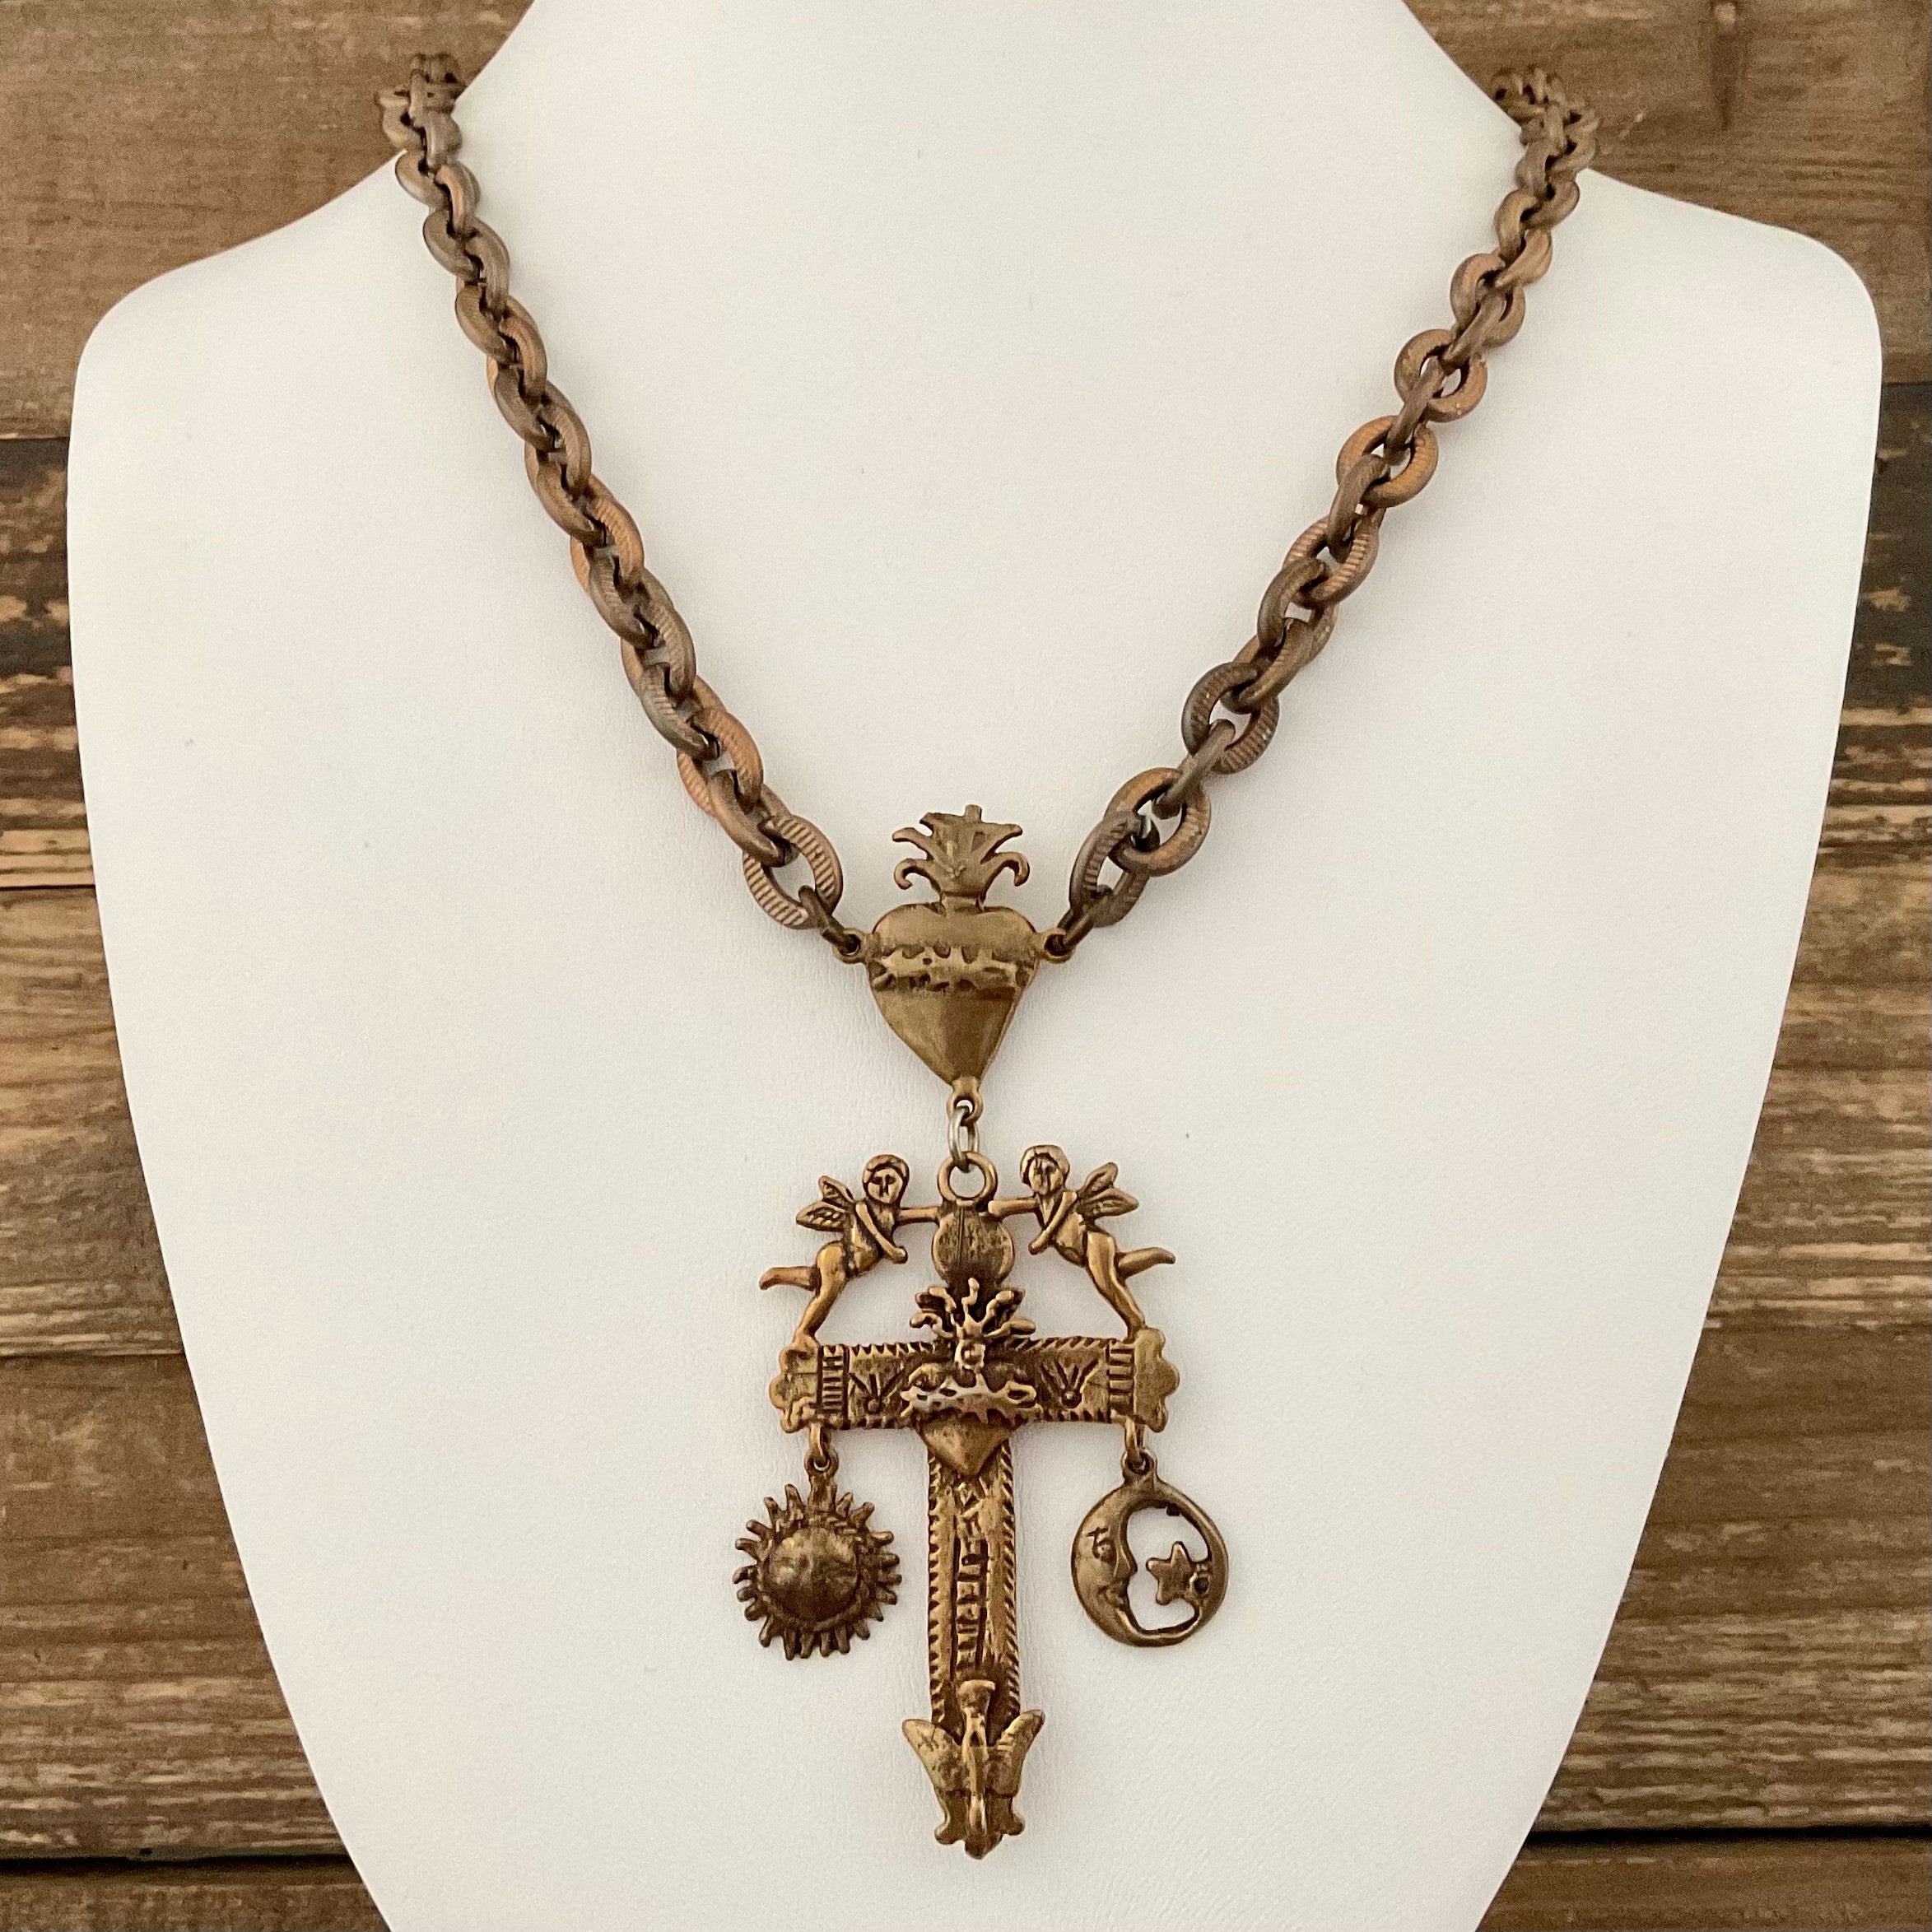 Antique Brass Chain with Cross Reproduction Pendant 18"